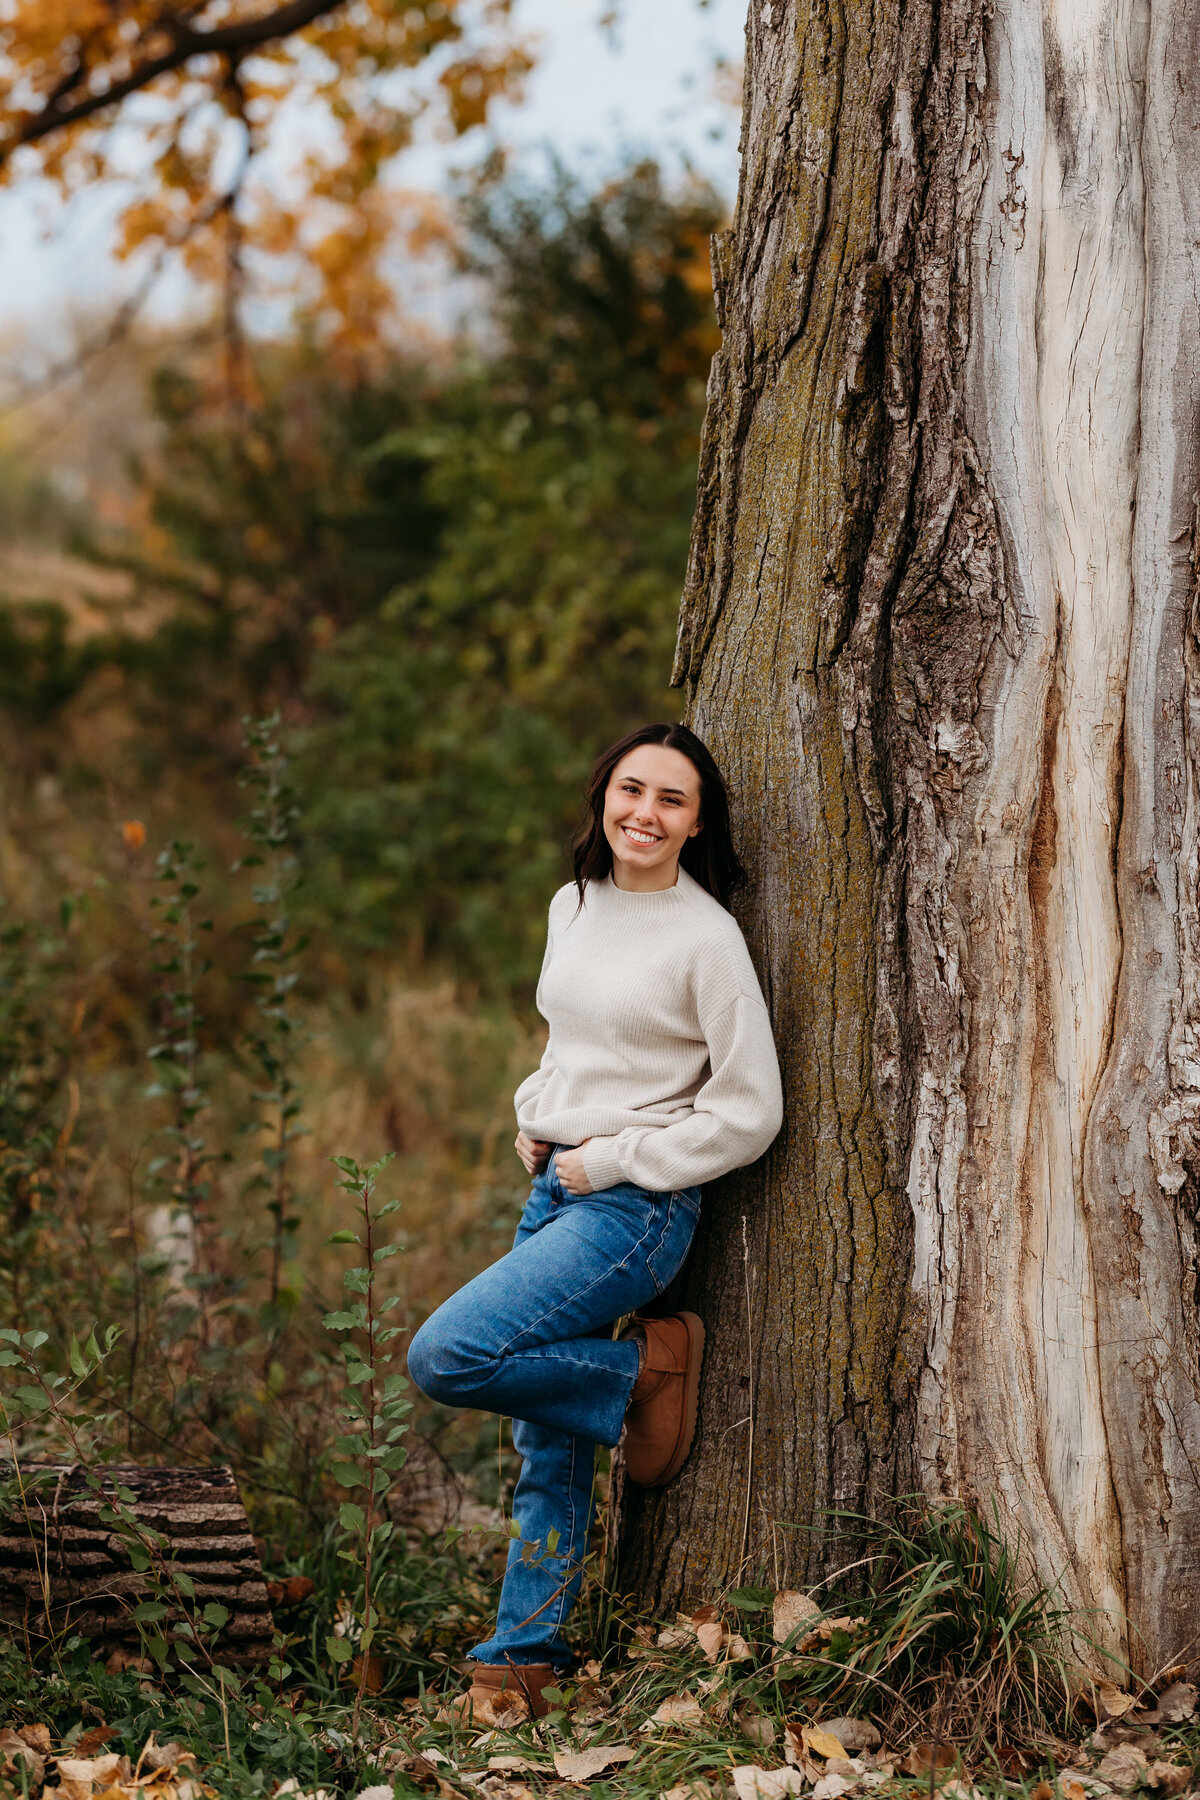 A girl leans on a tree with a foot up.